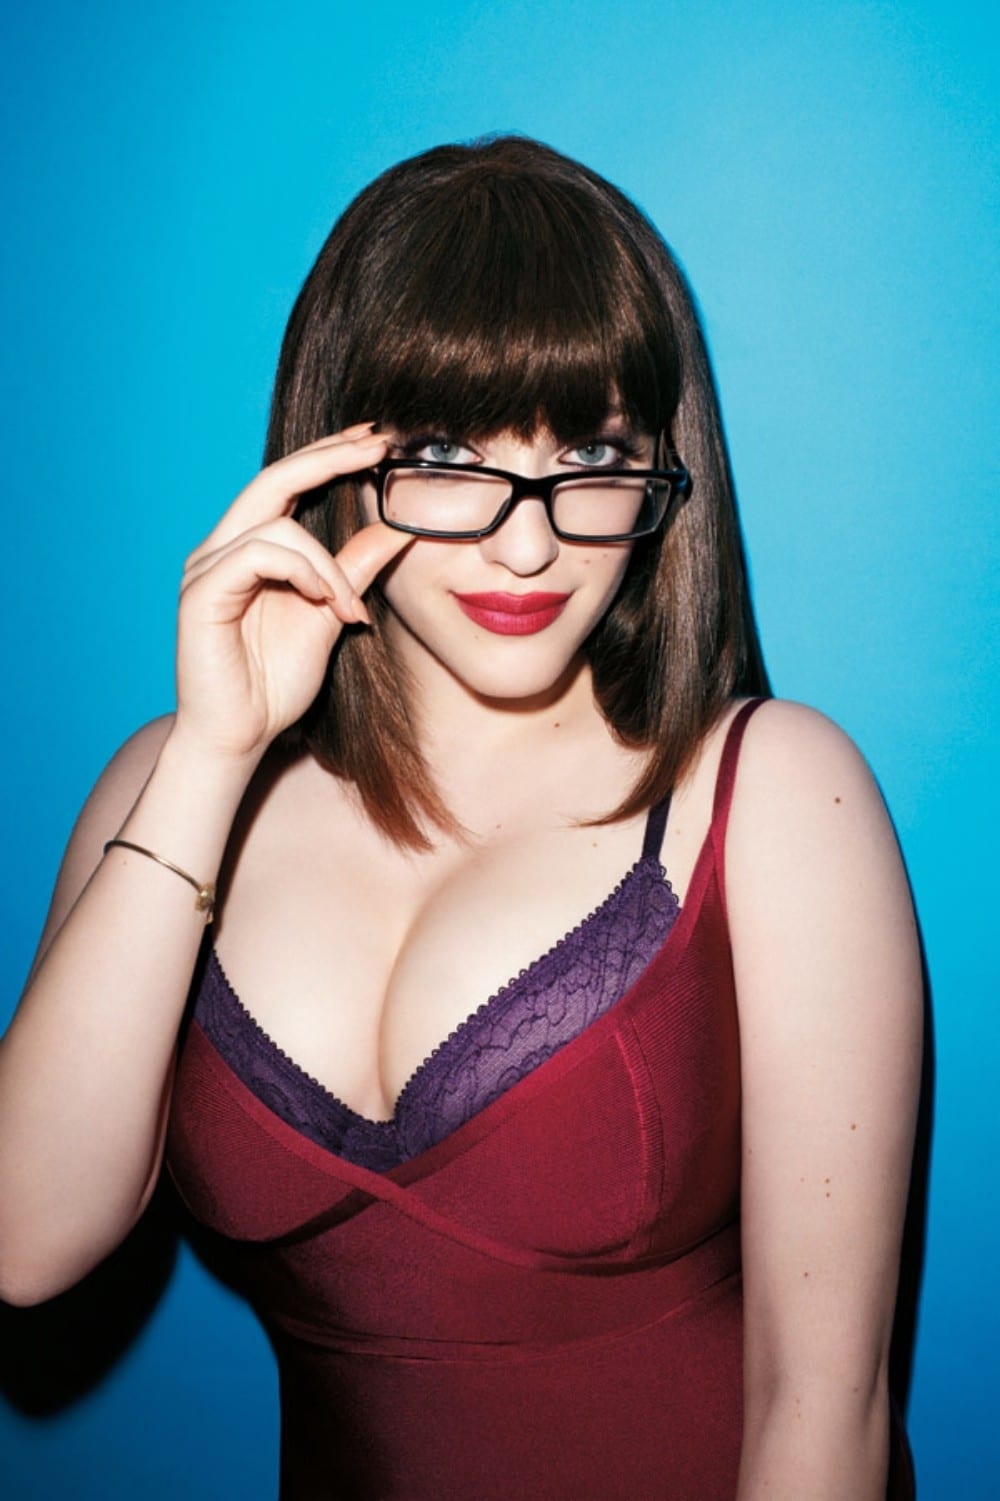 Kat Dennings looking sexy with thick rimmed back eyeglasses and showing off her cleavage